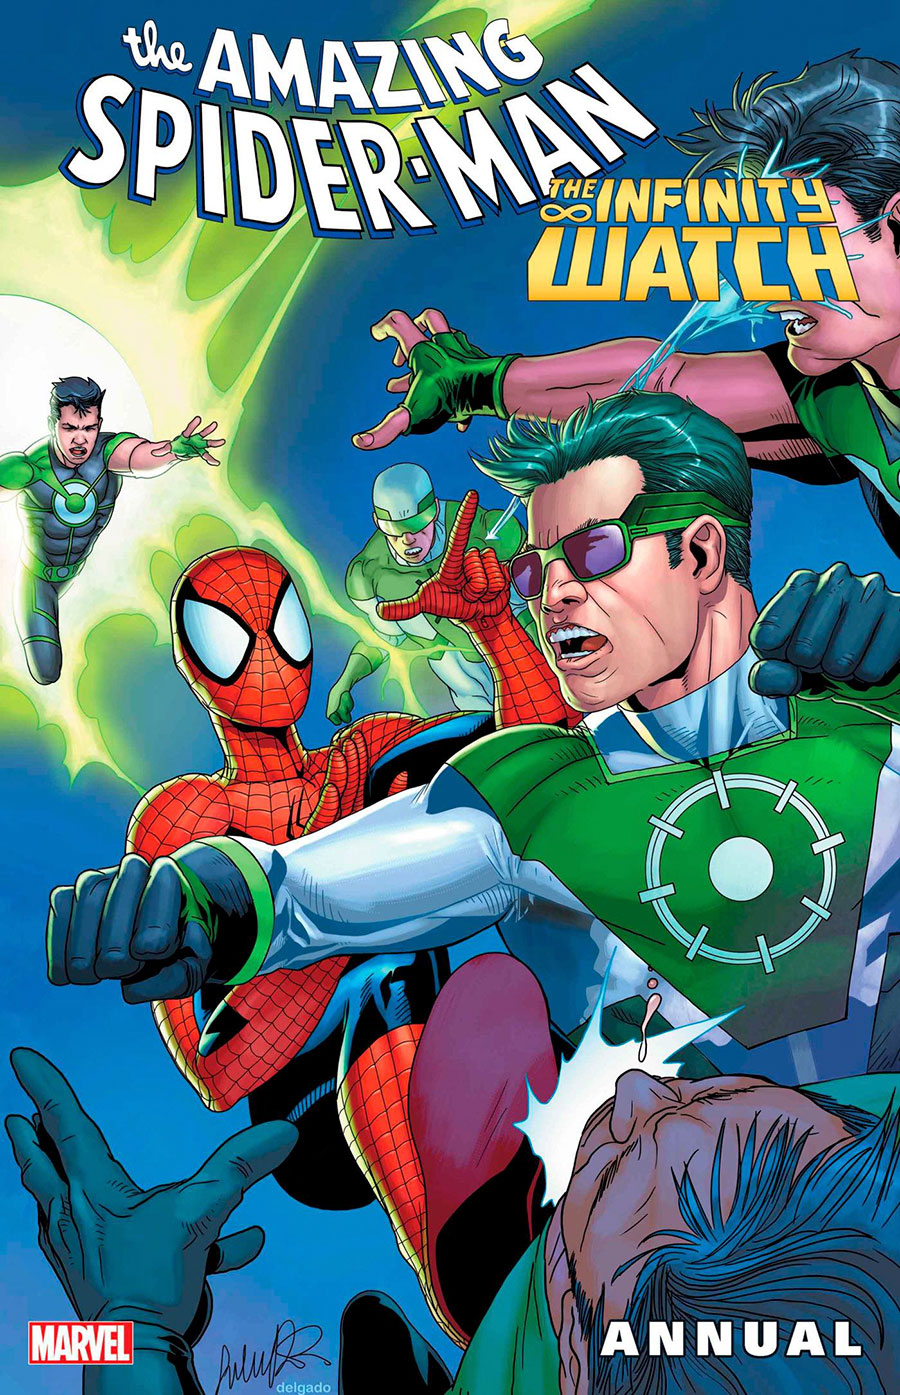 Amazing Spider-Man Vol 6 Annual (2024) #1 (One Shot) Cover A Regular Salvador Larroca Cover (Infinity Watch Part 2)